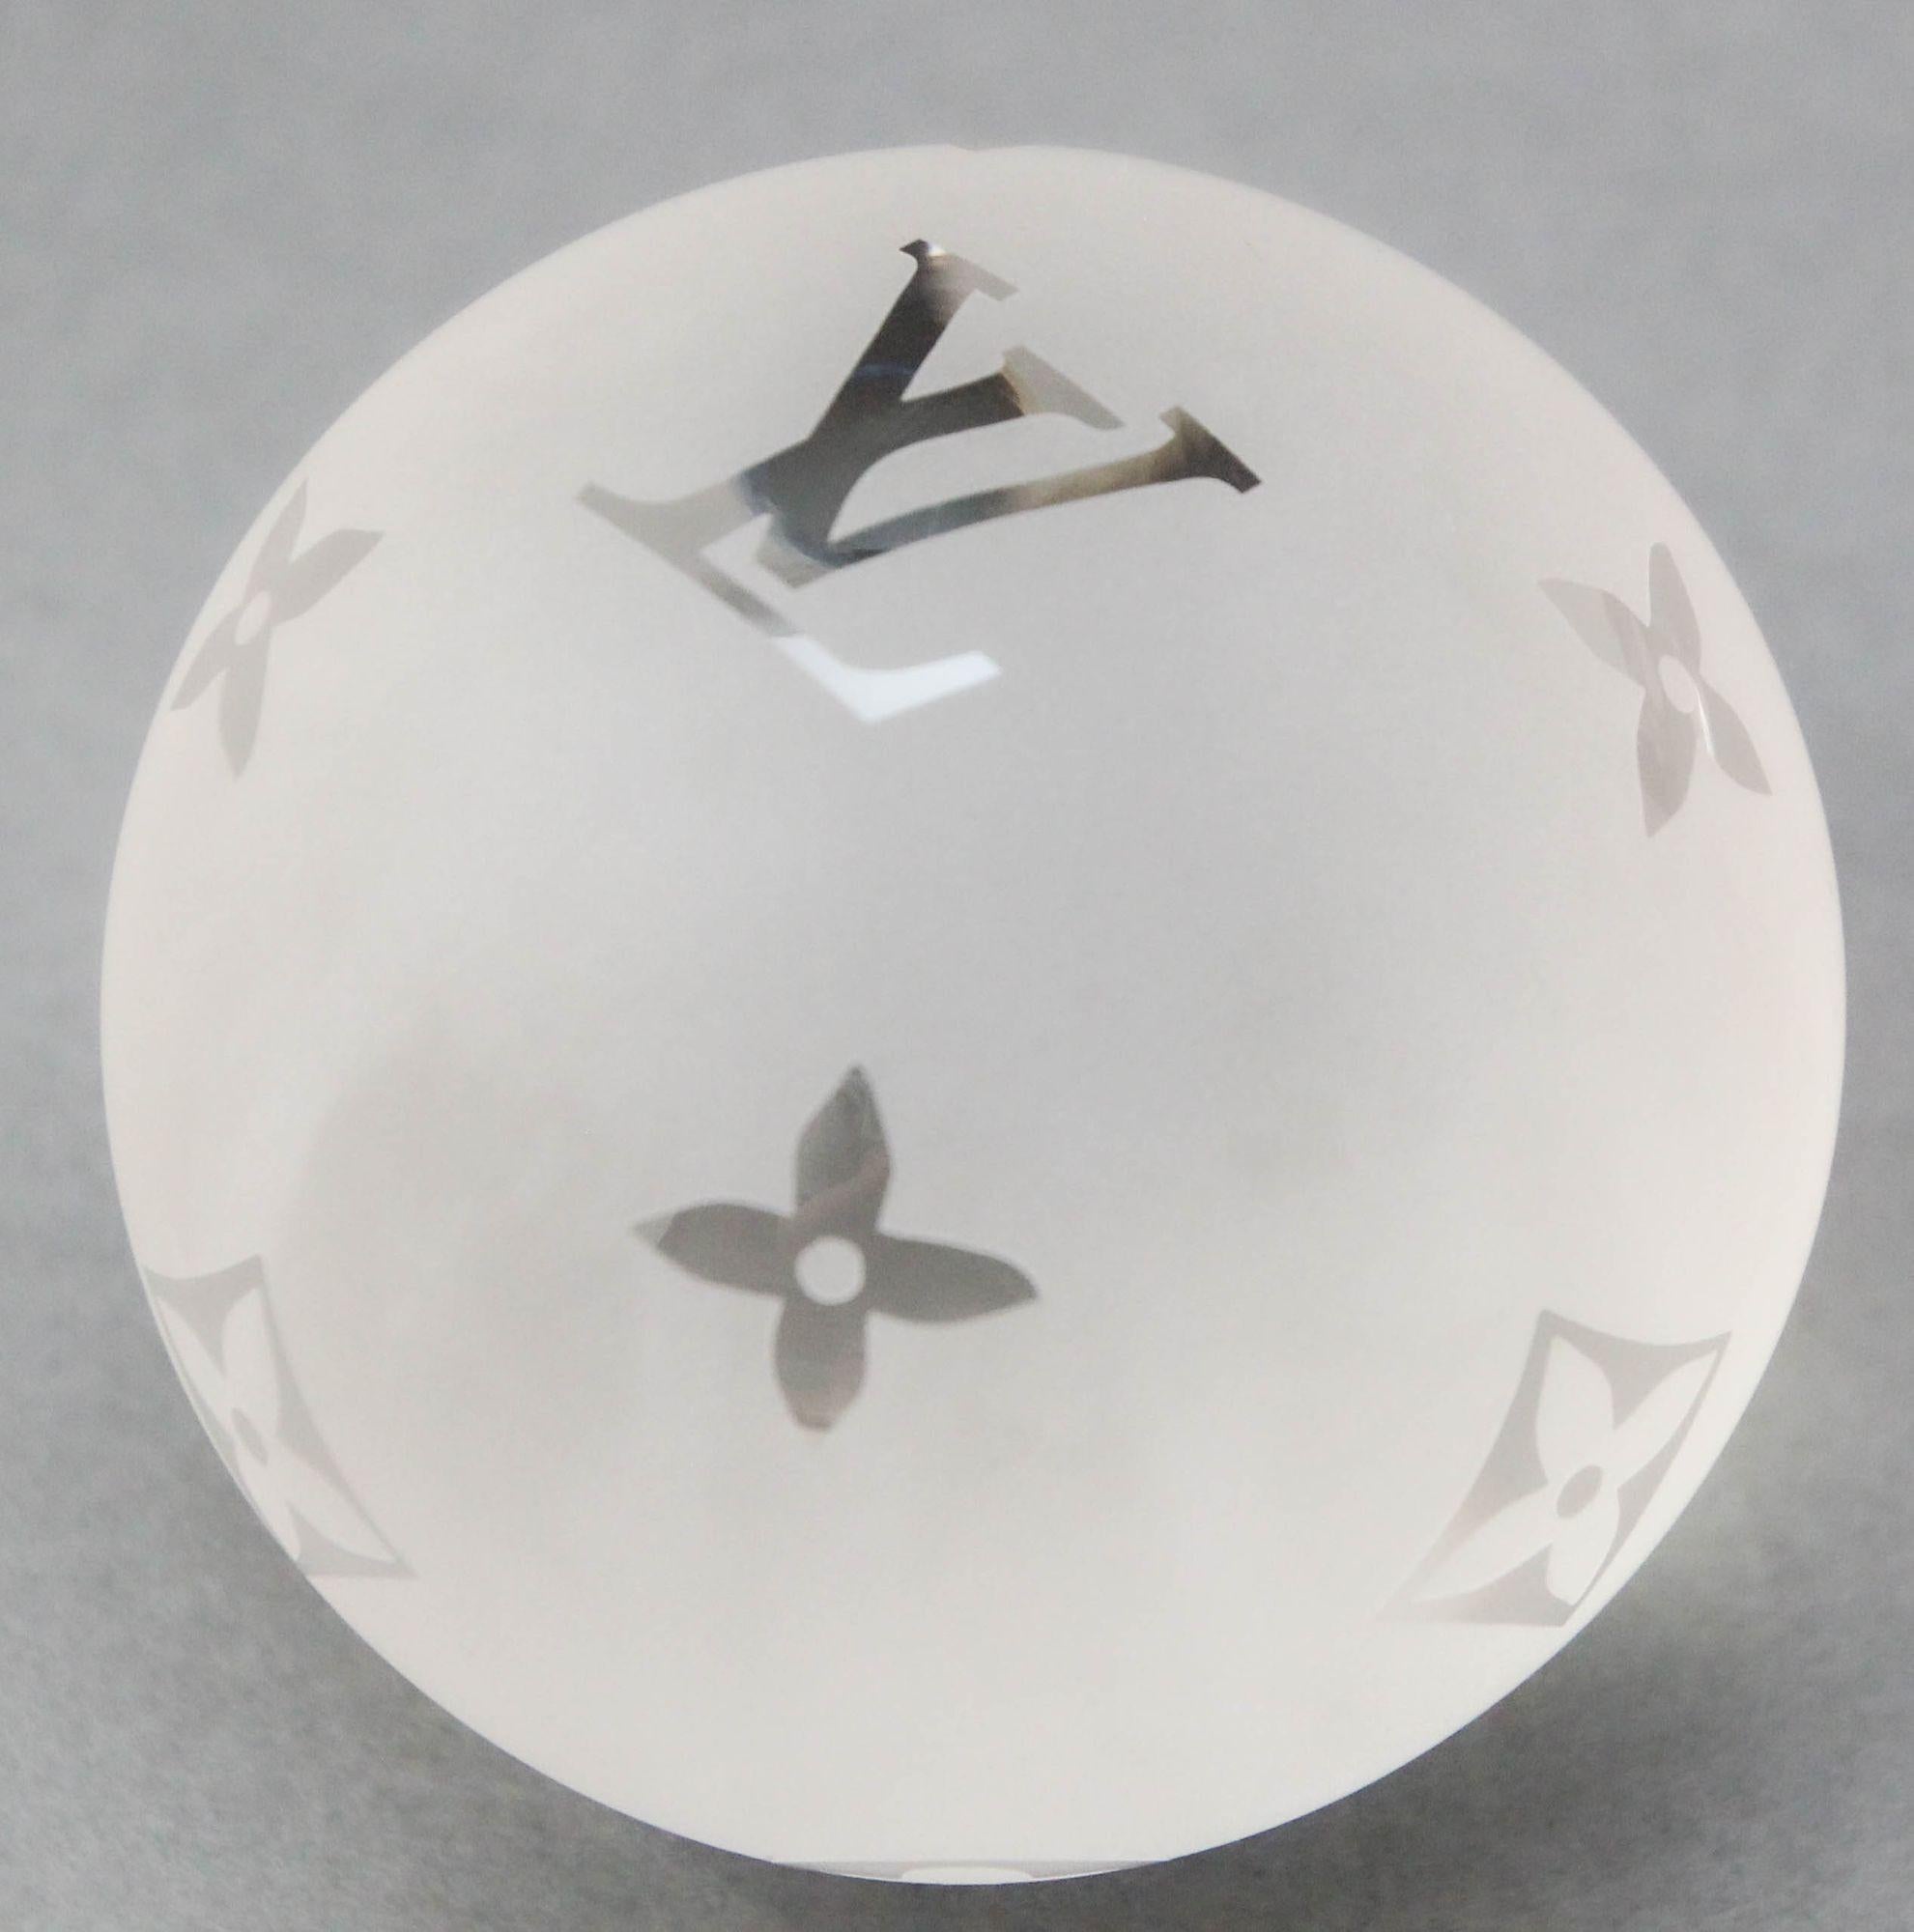 LOUIS VUITTON Paperweight Monogram Clear Crystal Paper Weight 12